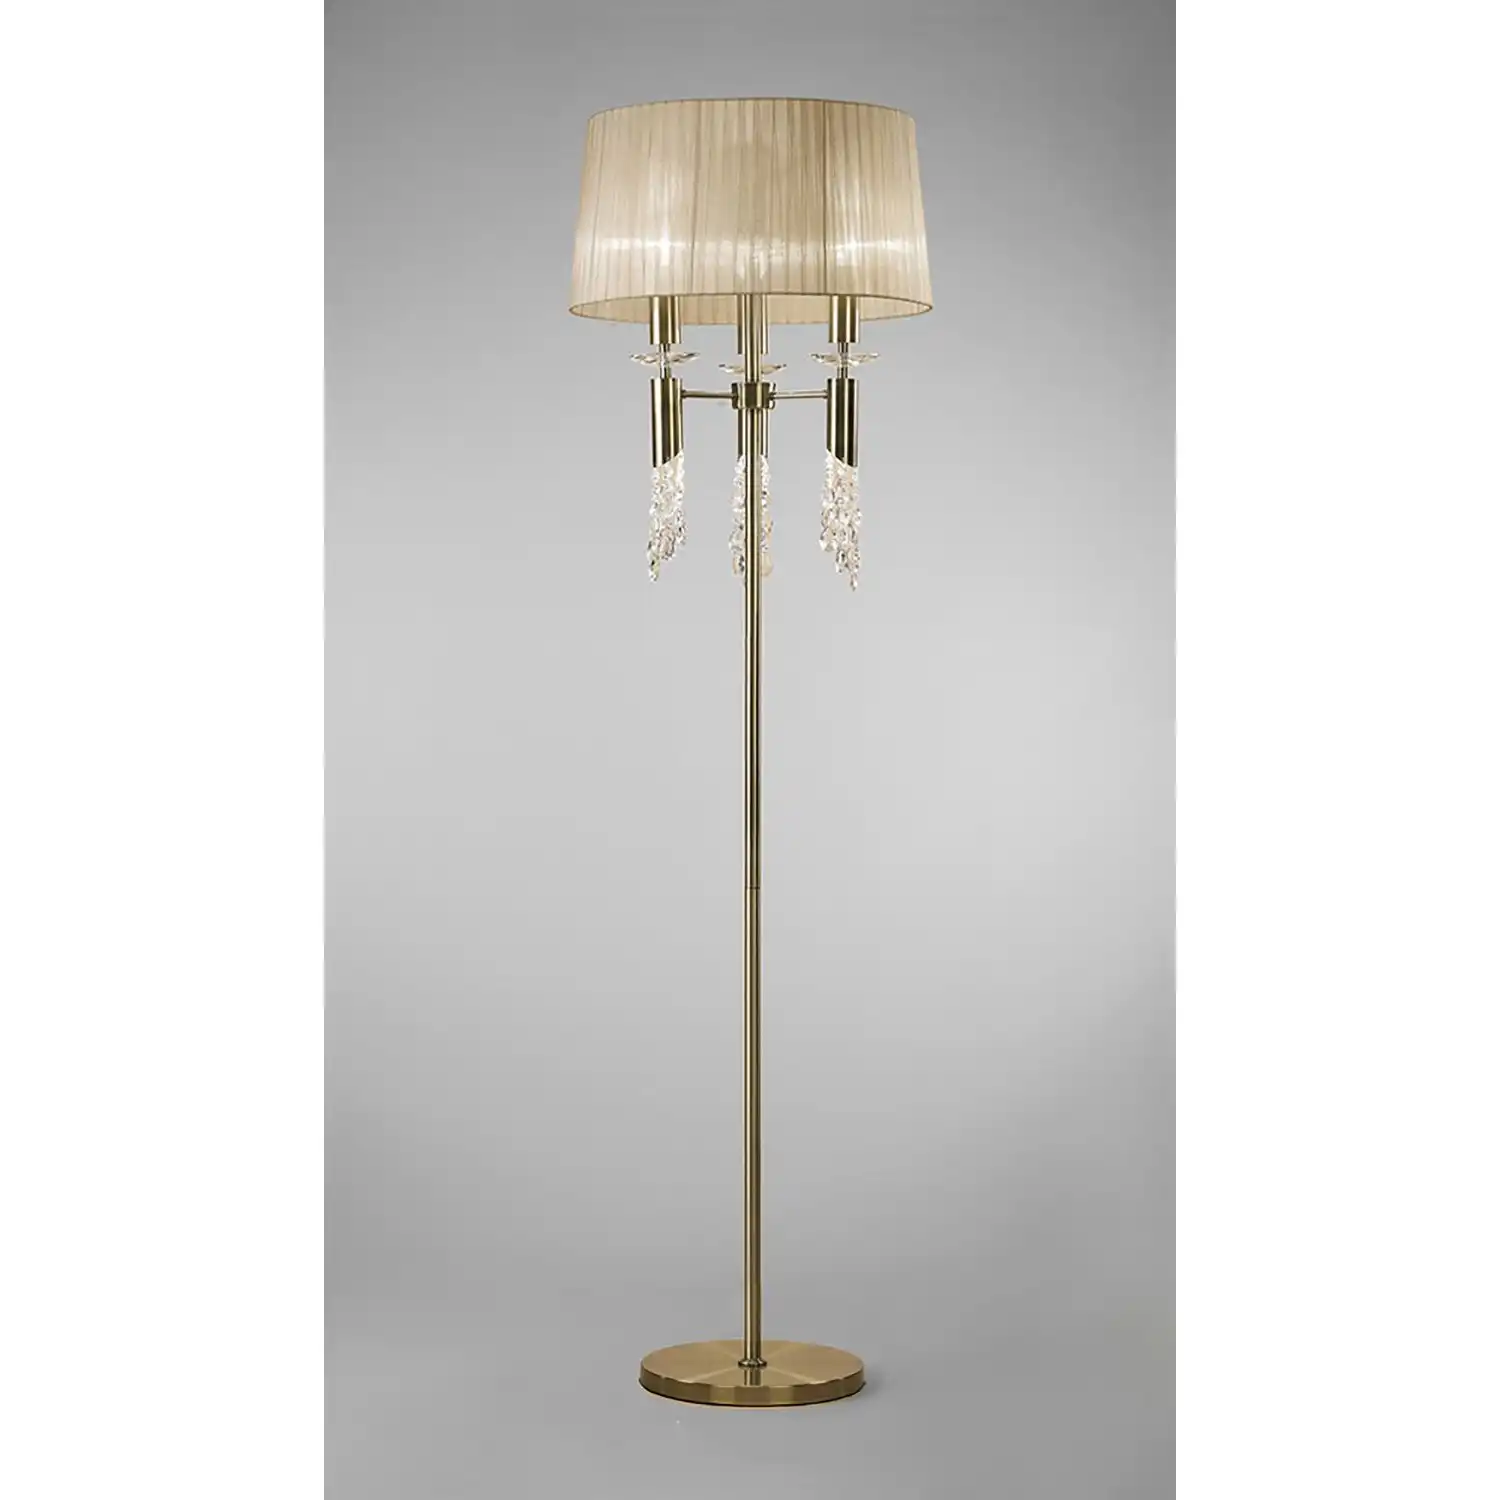 Tiffany Floor Lamp 3+3 Light E27+G9, Antique Brass With Soft Bronze Shade And Clear Crystal